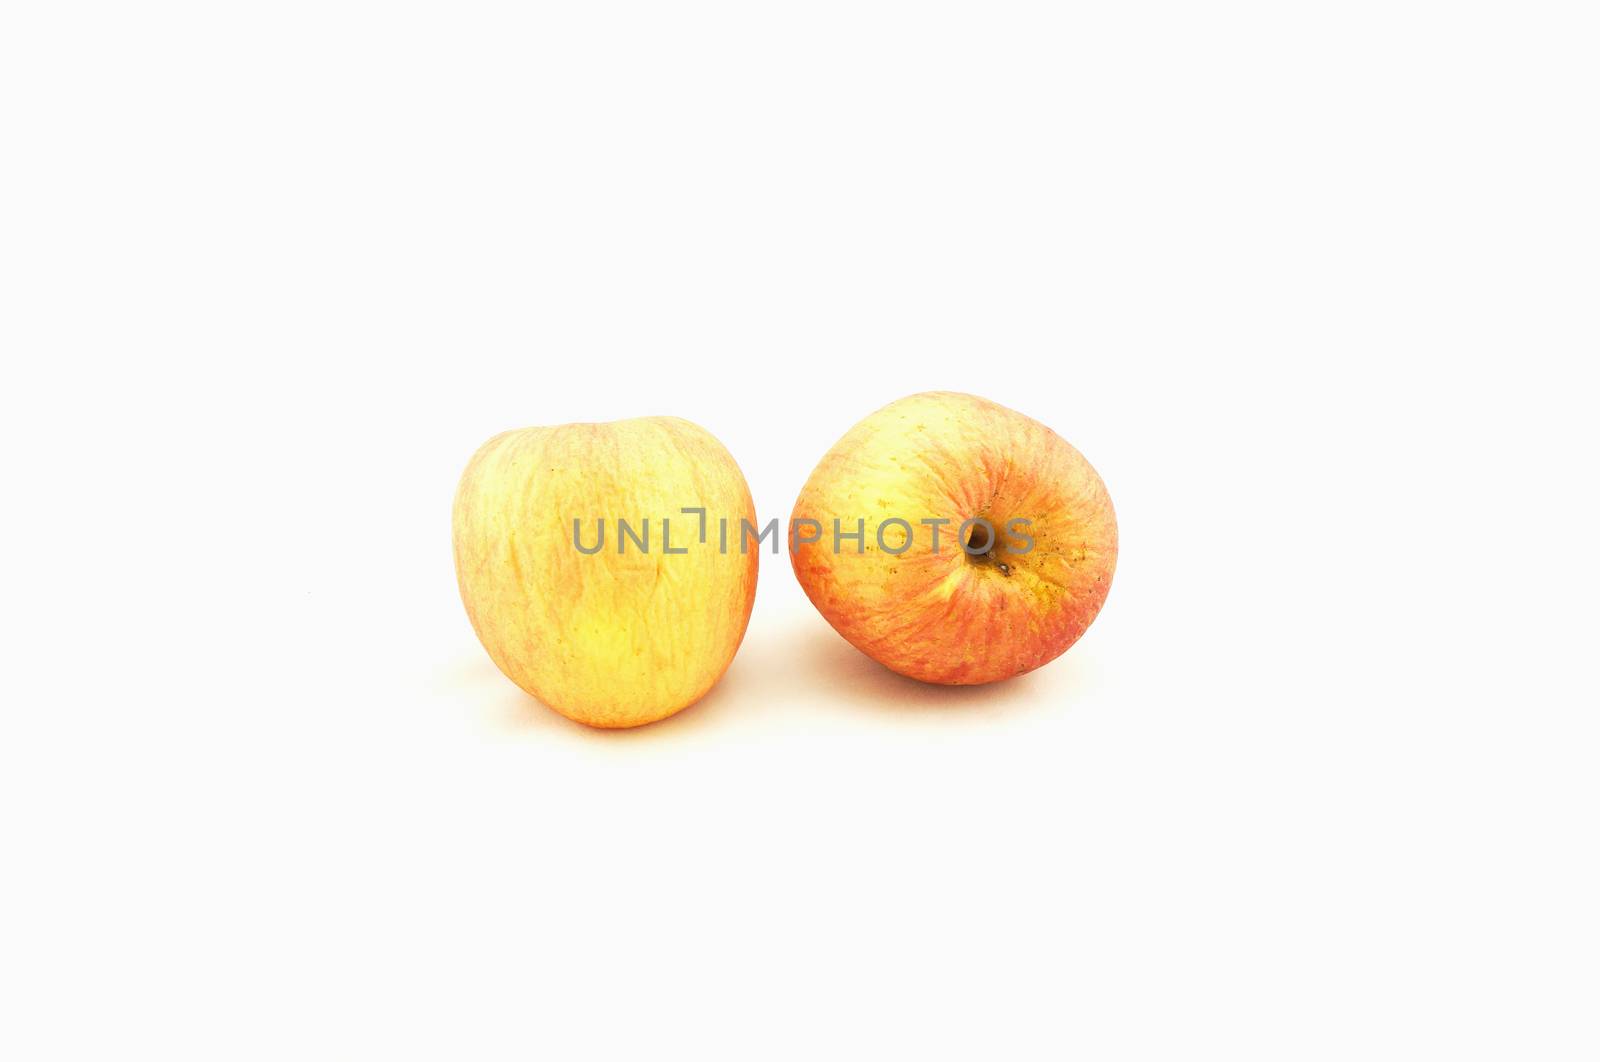 Two apples,the skin is starting to wrinkle, placed together on a white background.                             